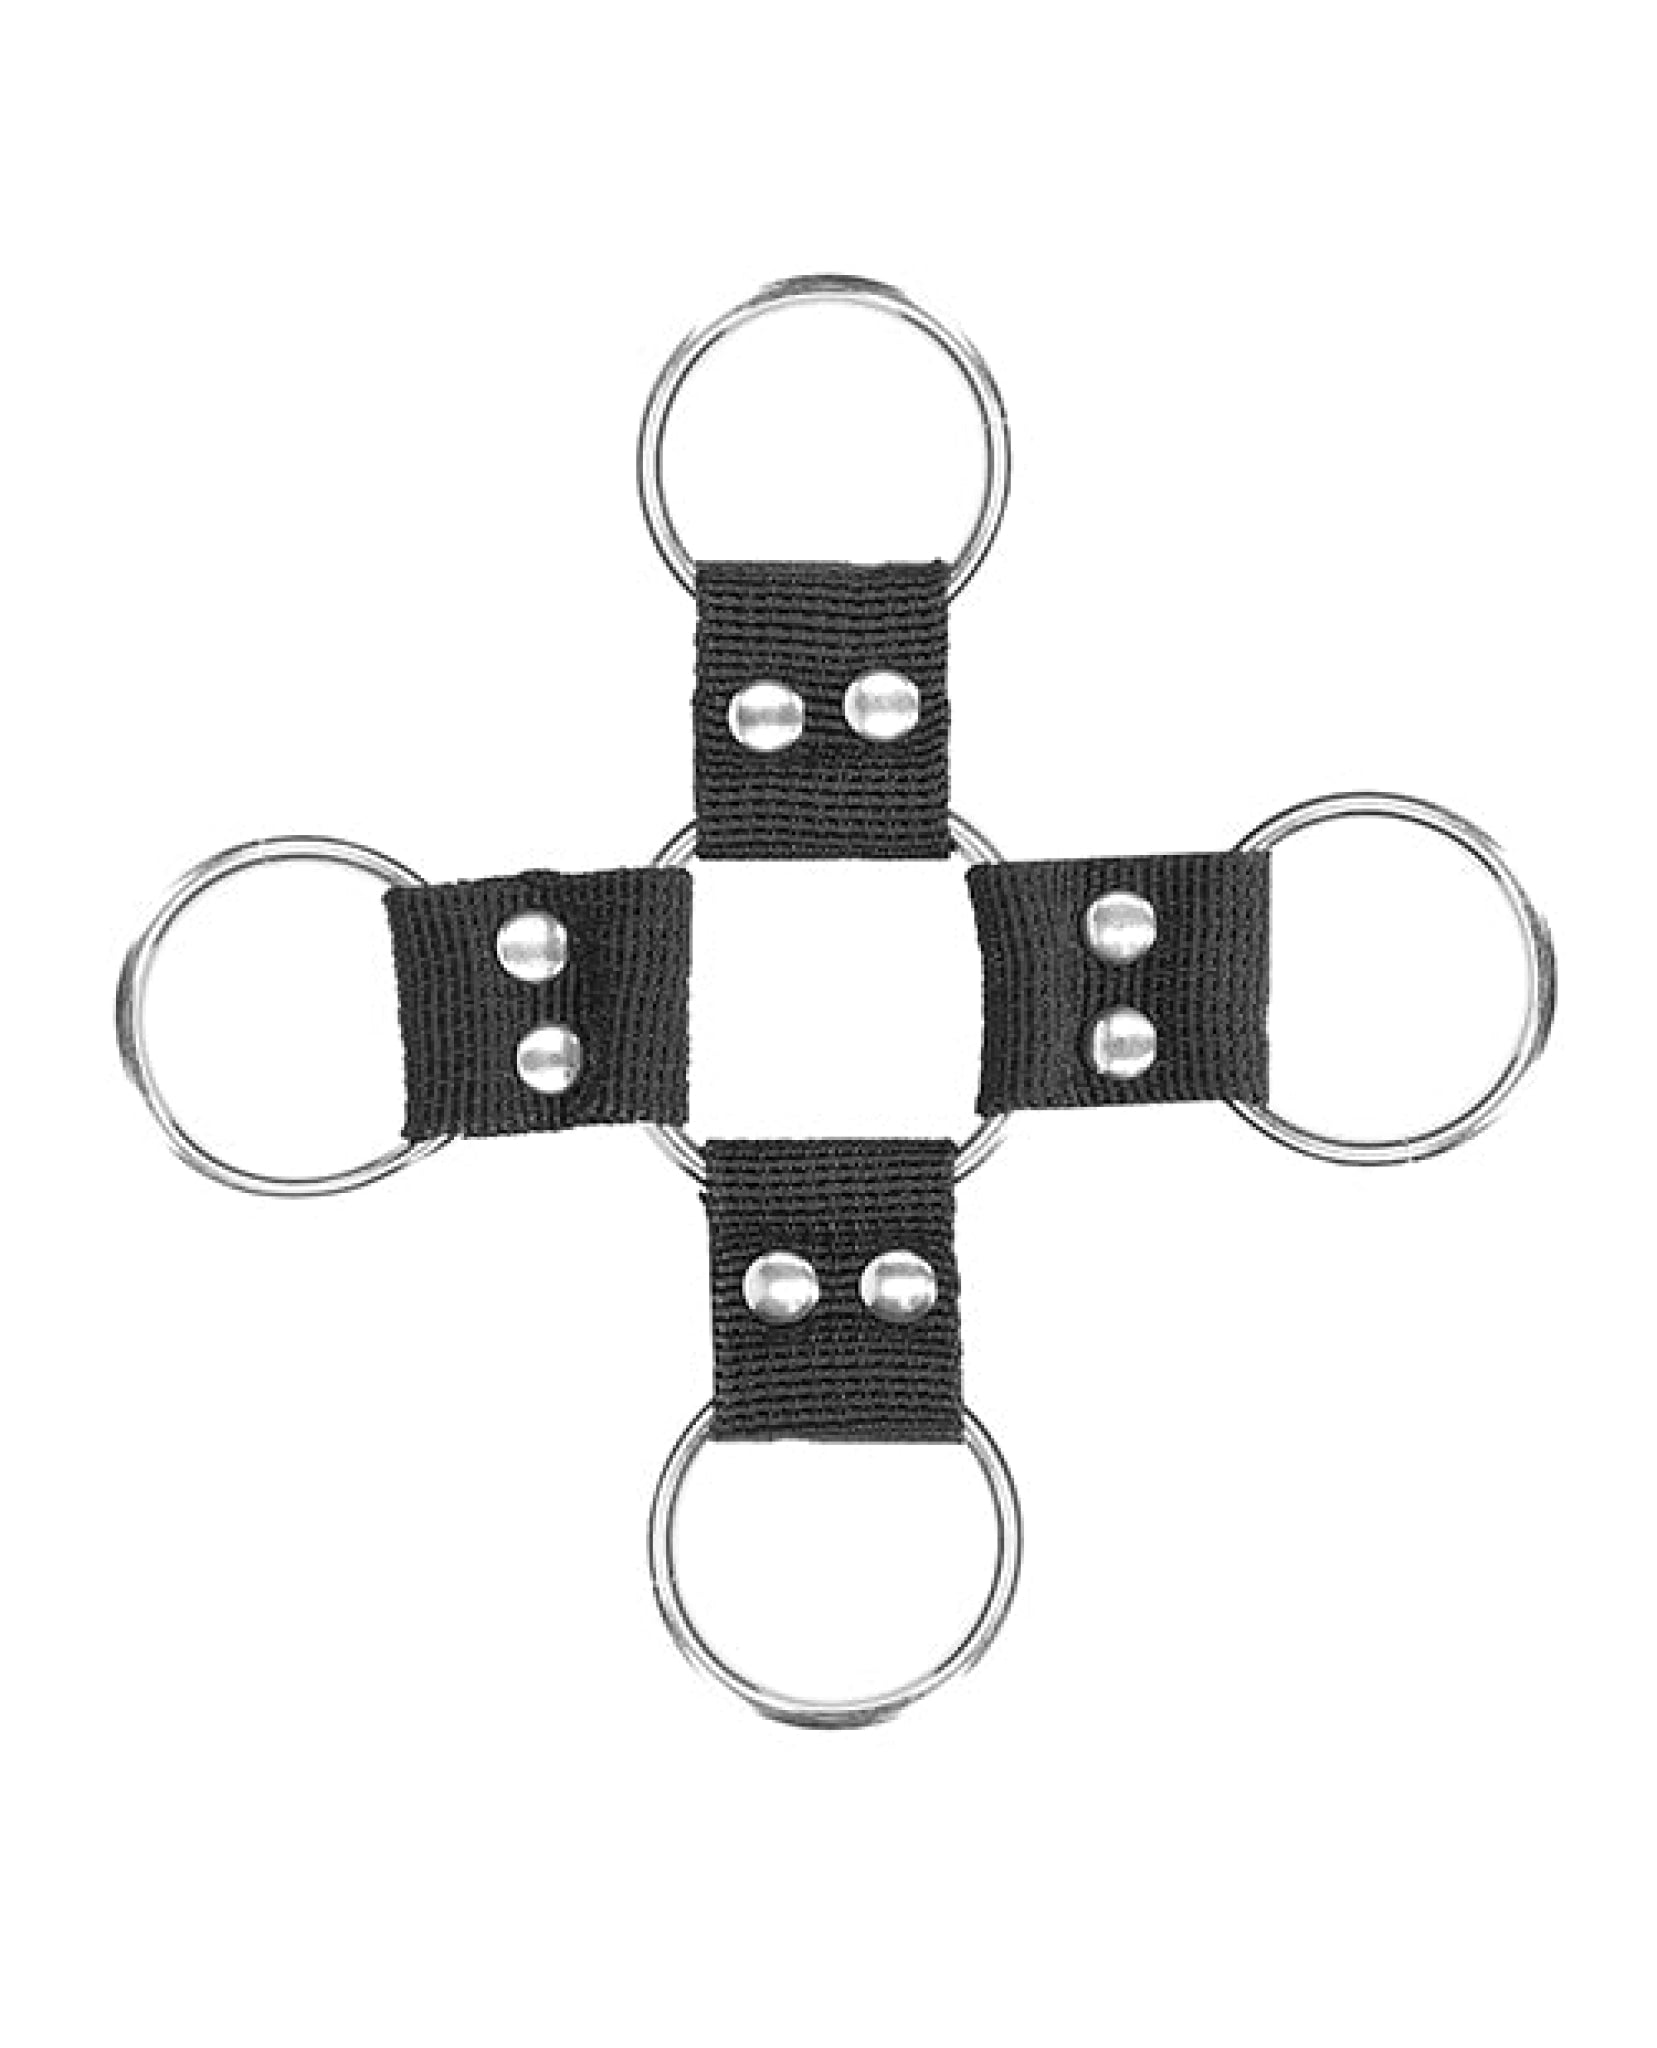 Shots Ouch Black & White Velcro Hogtie W-hand & Ankle Cuffs - Black Shots